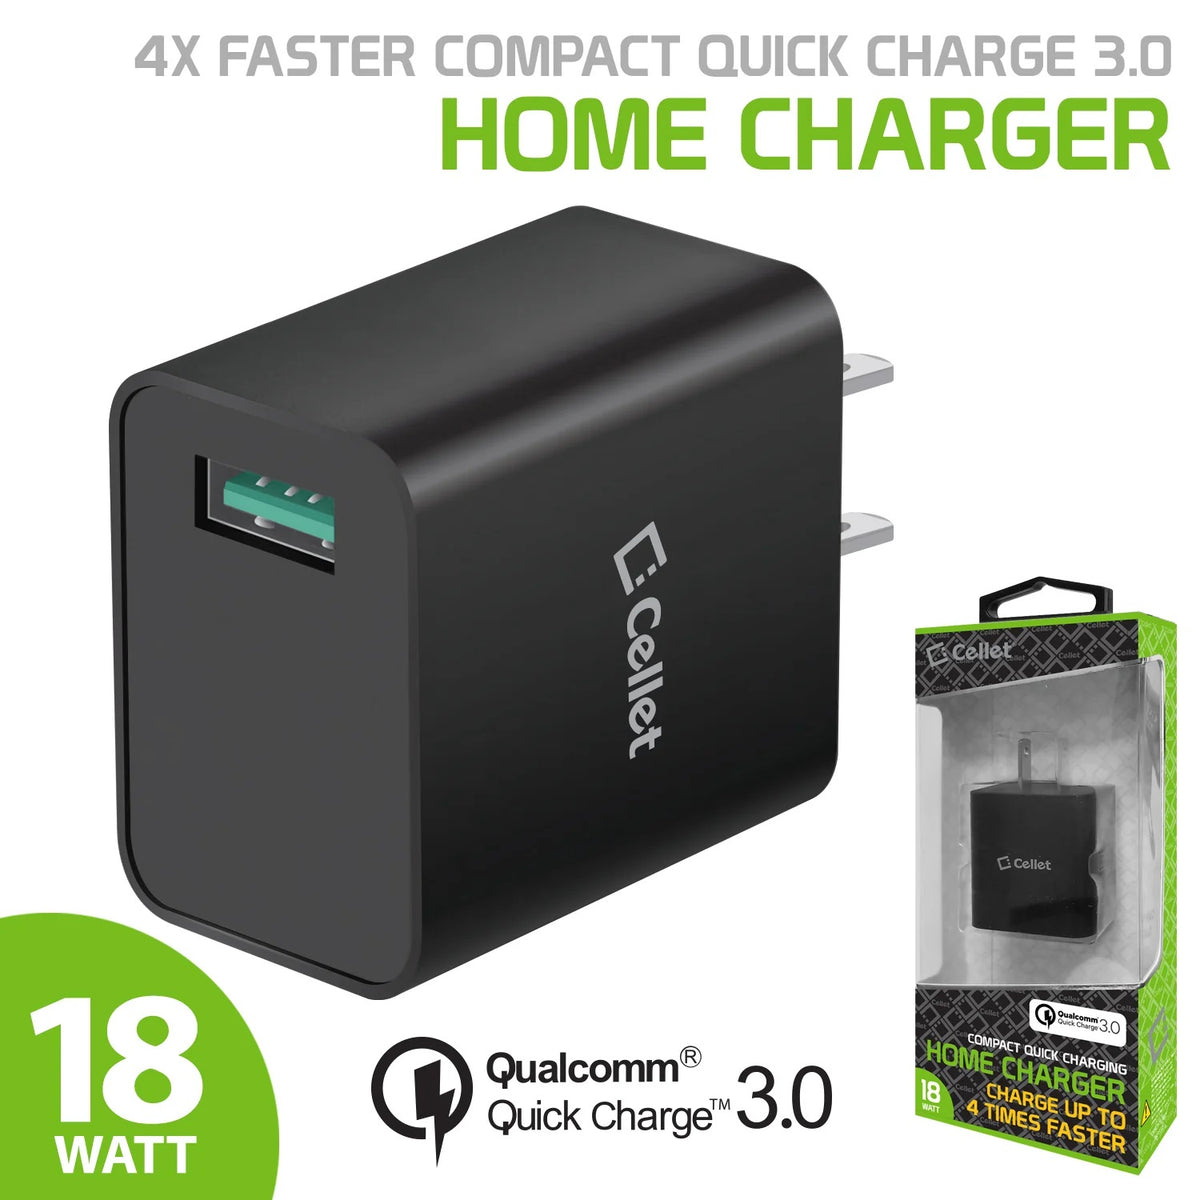 Cellet 4x Faster Compact Quick charge 3.0 18W USB Wall Adapter Home Charger, Black